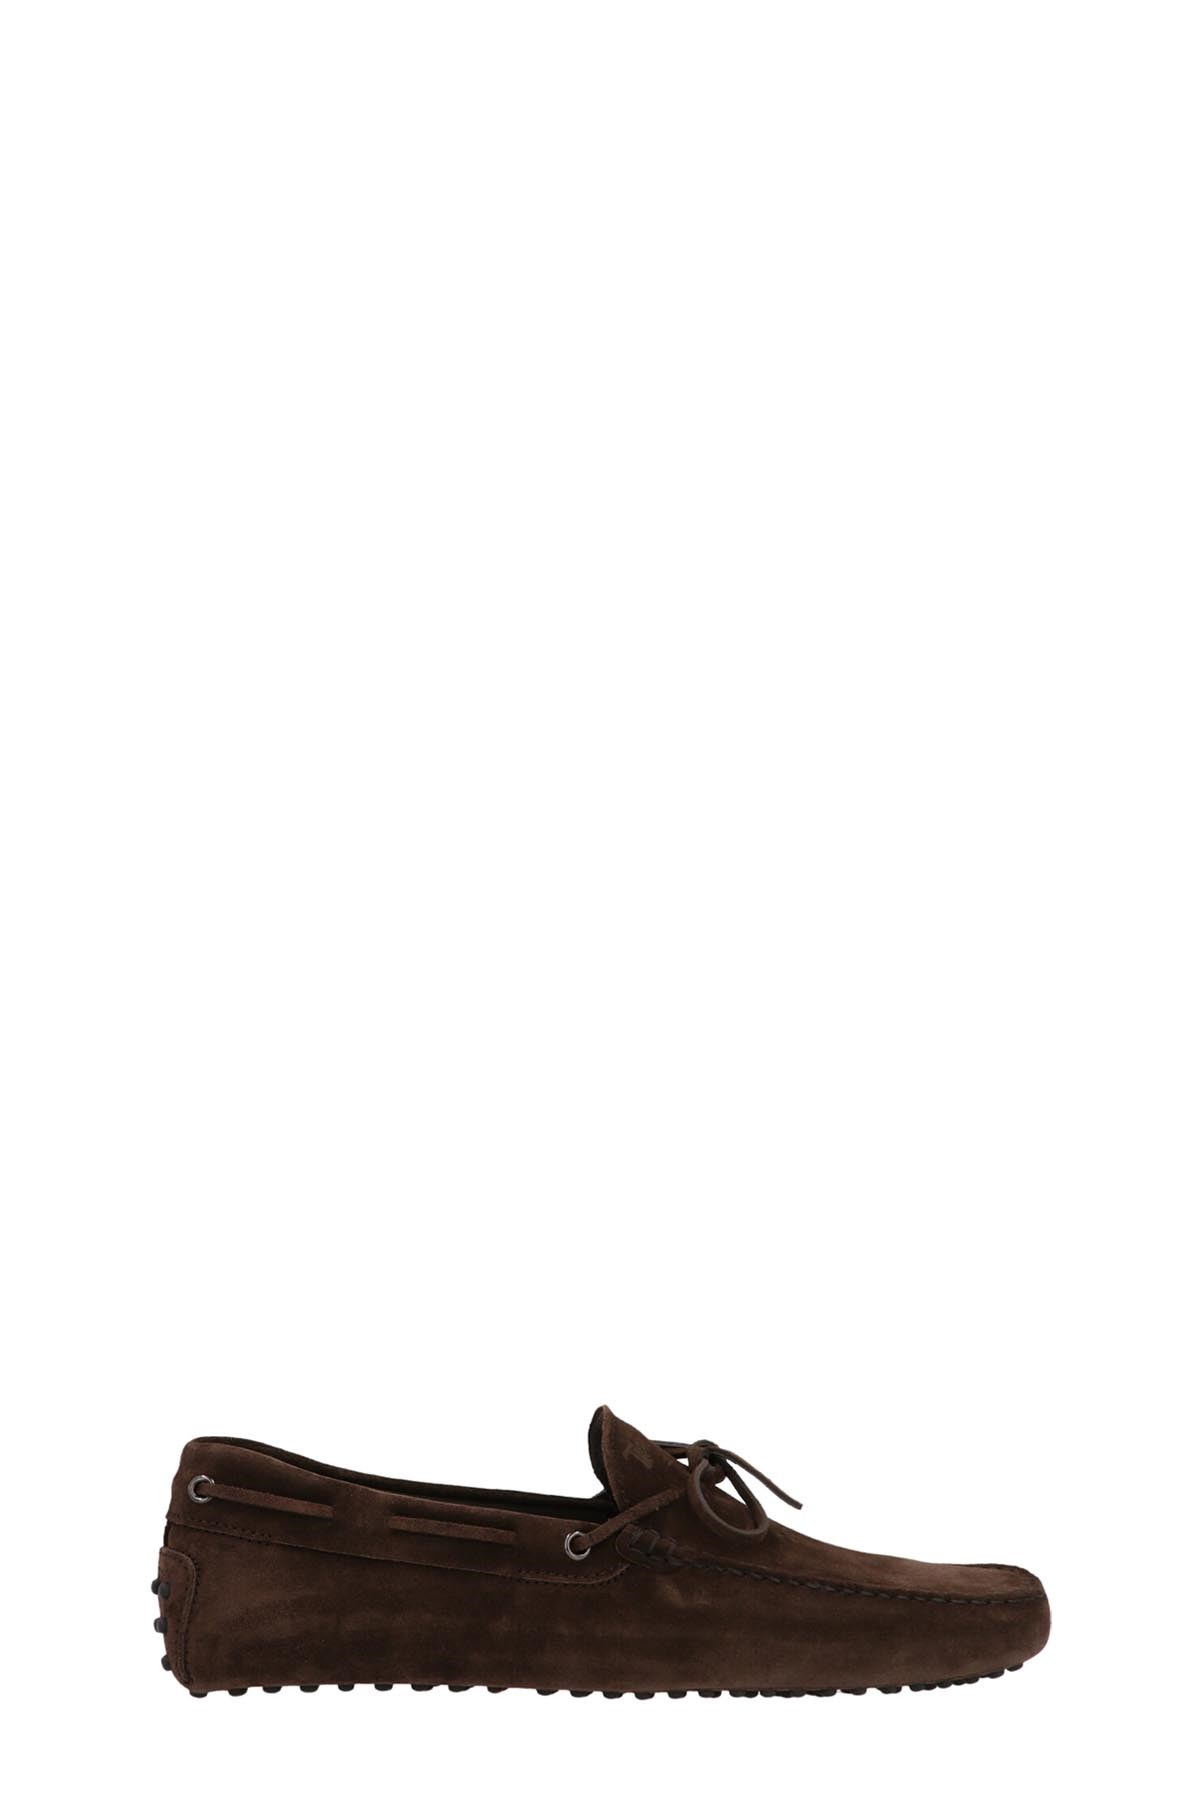 TOD'S 'Driver’ Loafers